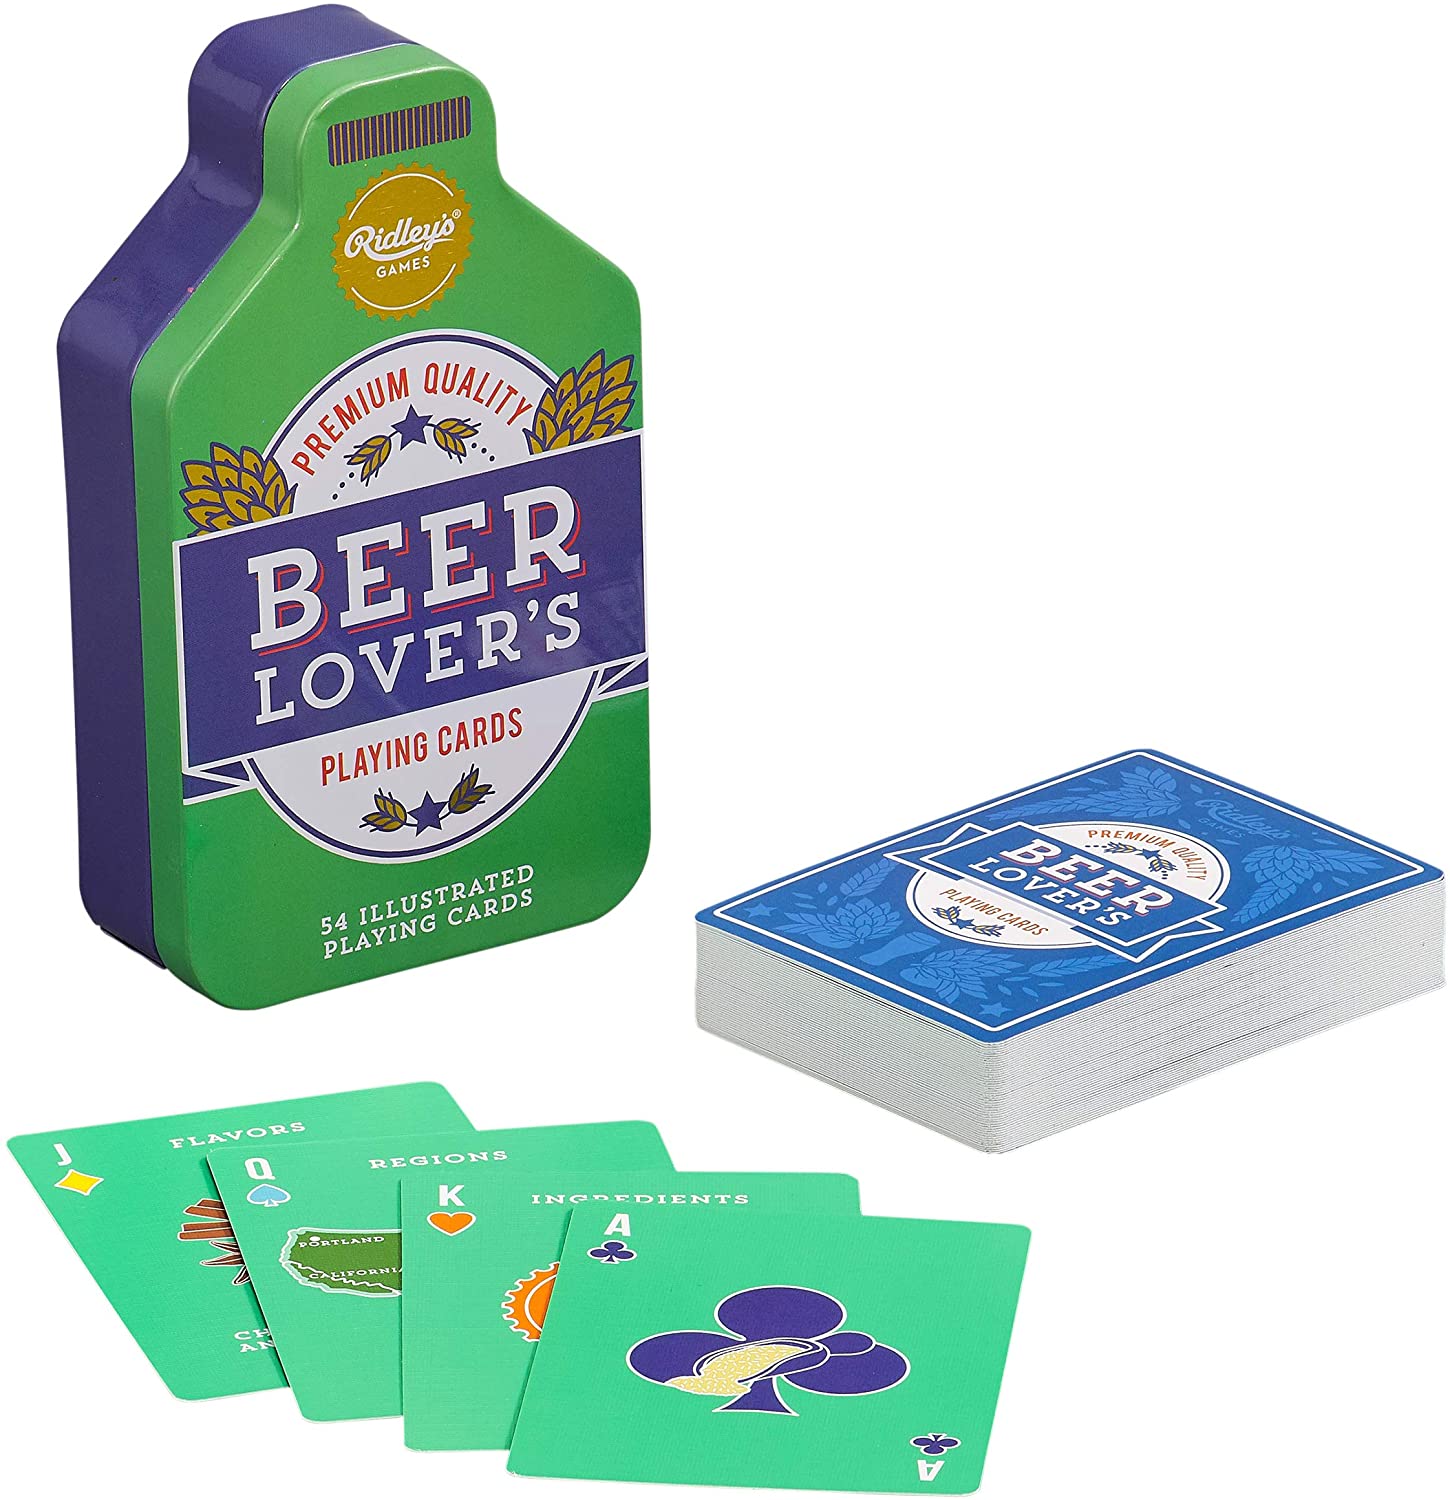 Ridley's Beer Lover's Playing Cards